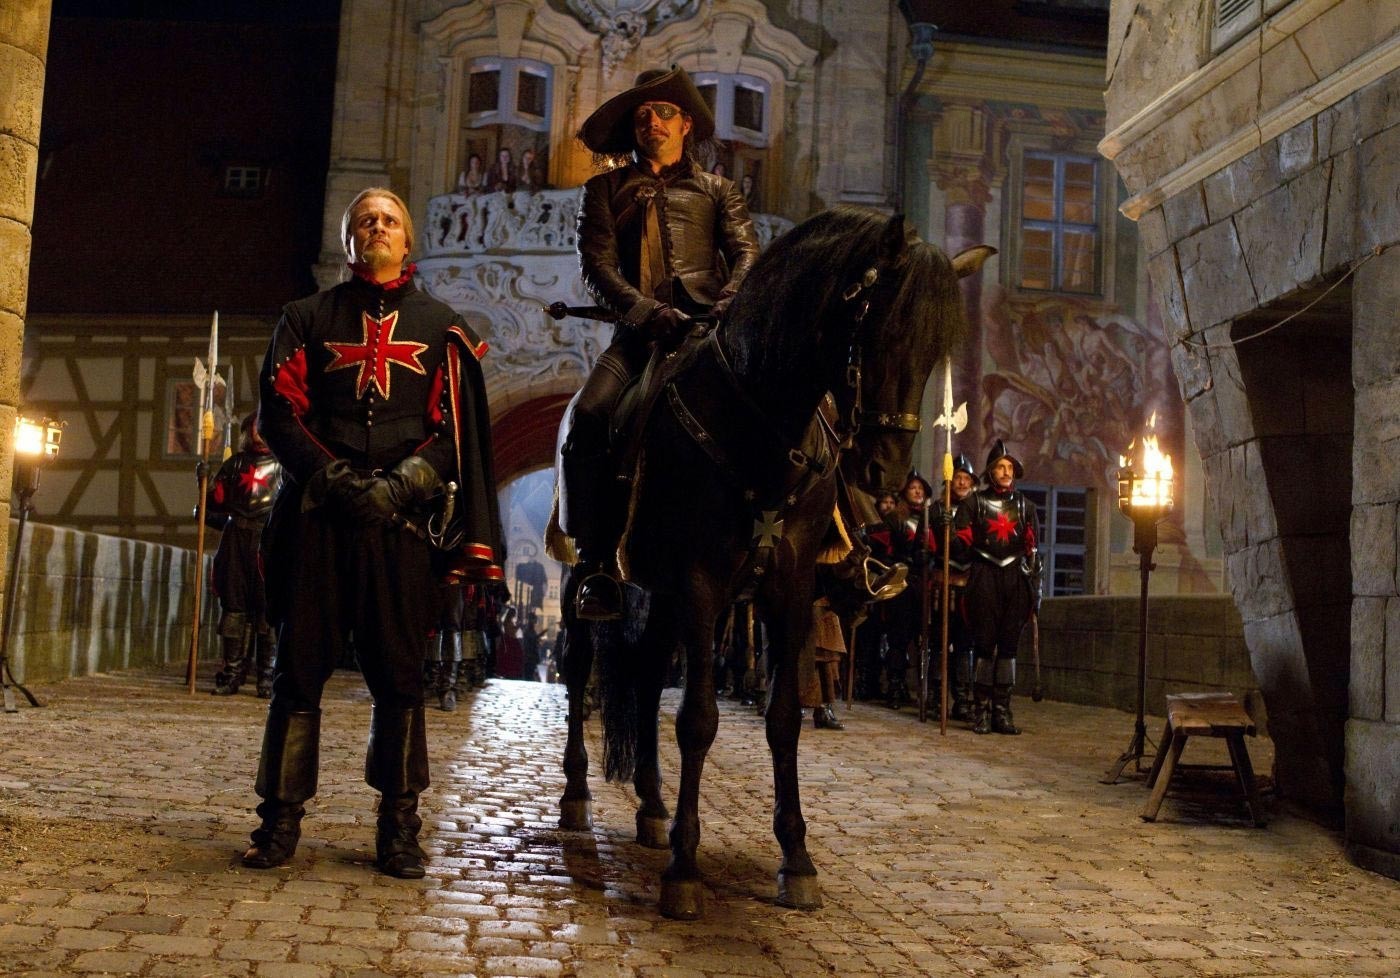 Mads Mikkelsen stars as Rochefort and Carsten Norgaard stars as Jussac in Summit Entertainment's The Three Musketeers (2011)